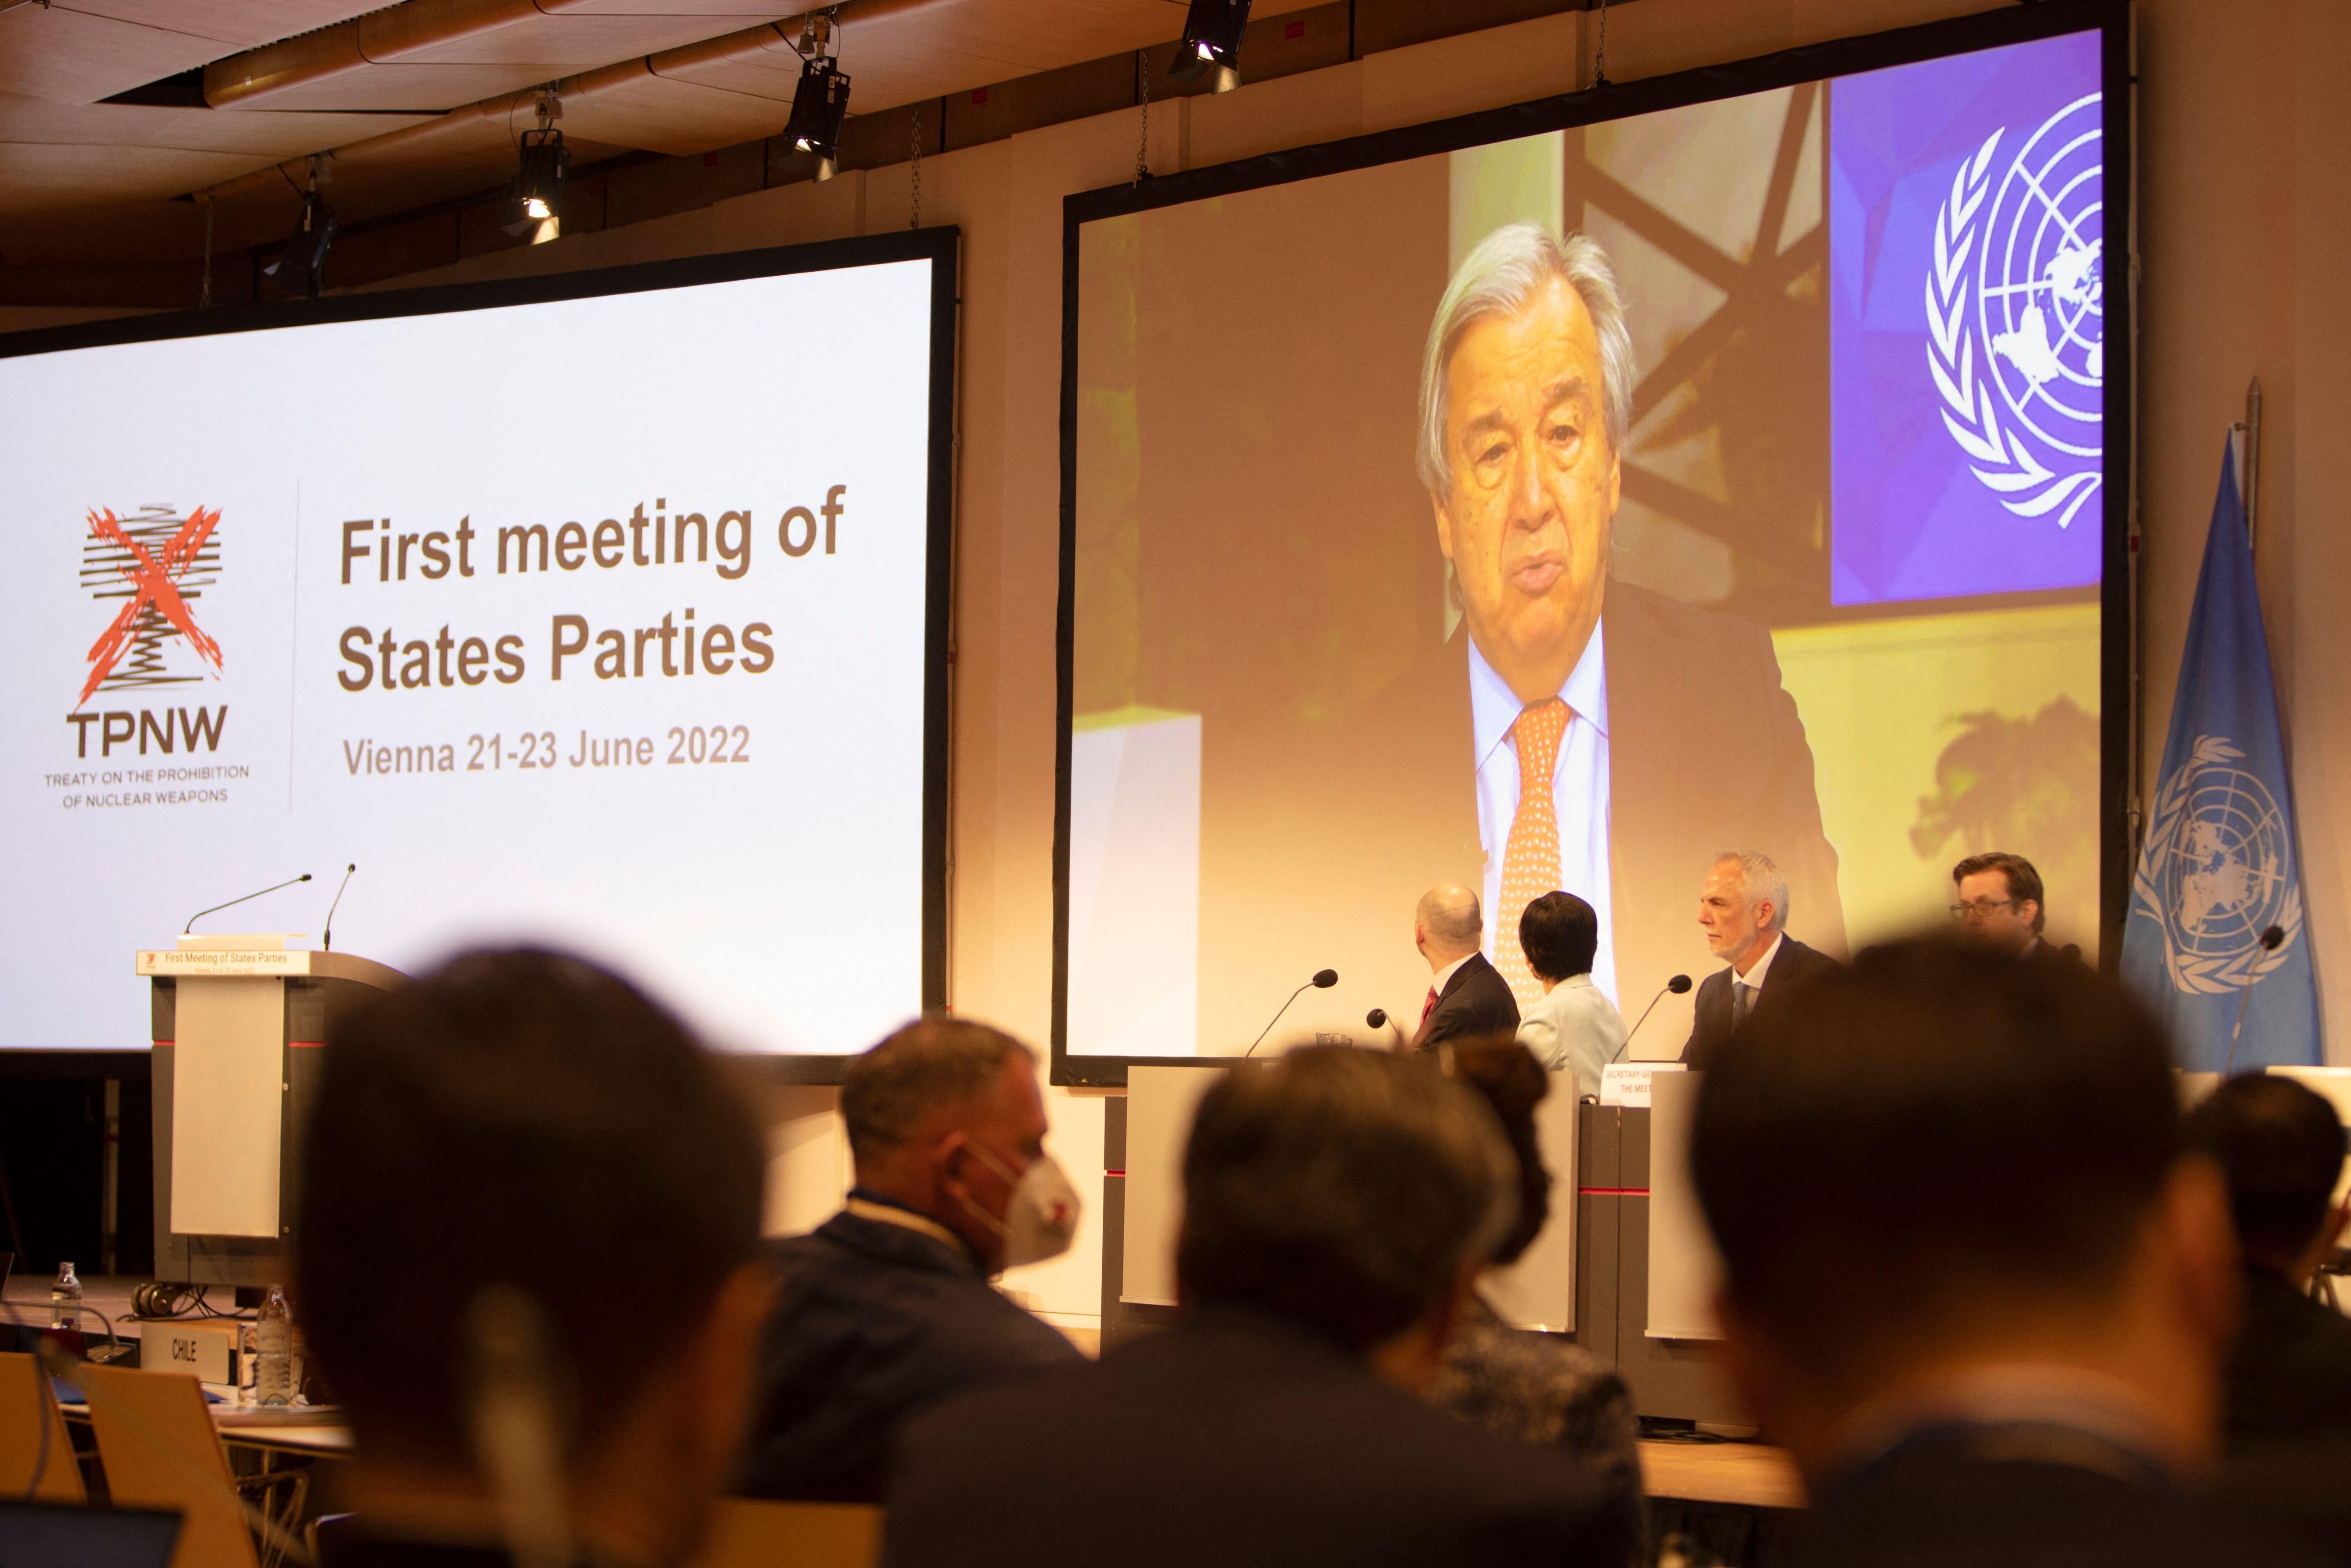 U.N. Secretary-General António Guterres speaks during the Treaty on the Prohibition of Nuclear Weapons'  first Meeting of States Parties in Vienna, Austria, on June 21, 2022.